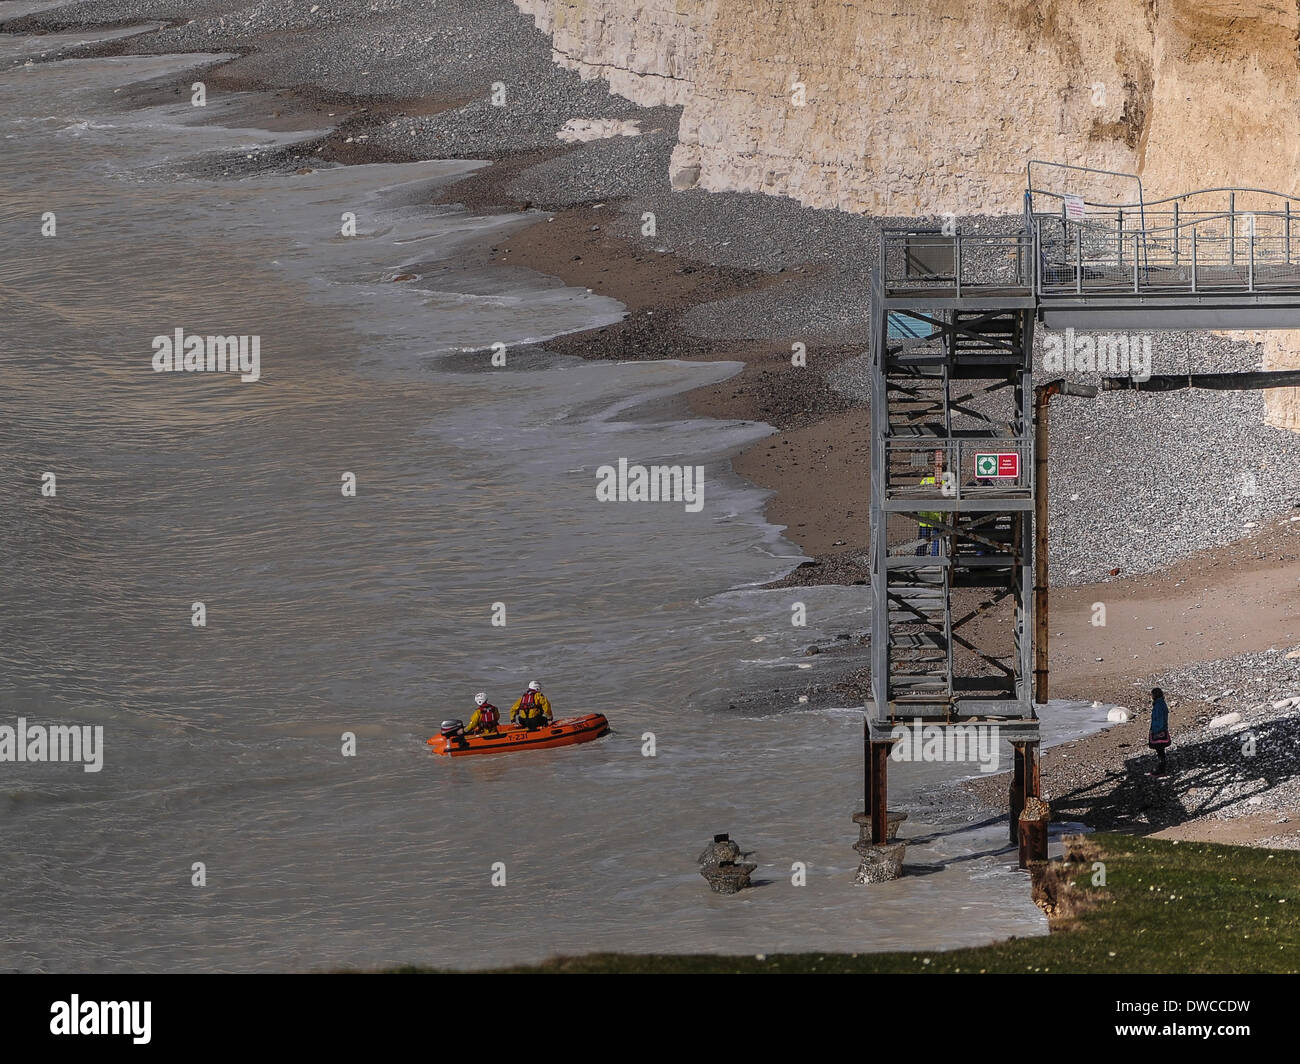 BirlingGap,East Sussex,UK..5 March 2014..A young woman  is rescued from BirlingGap beach, having walked from Cuckmere Haven to find the beach access steps cut off at the bottom due to storm damage. Trapped by the rising tide RNLI Newhaven took her off the beach in a dingy to the lifeboat waiting off shore.David Burr/Alamy Live News Stock Photo